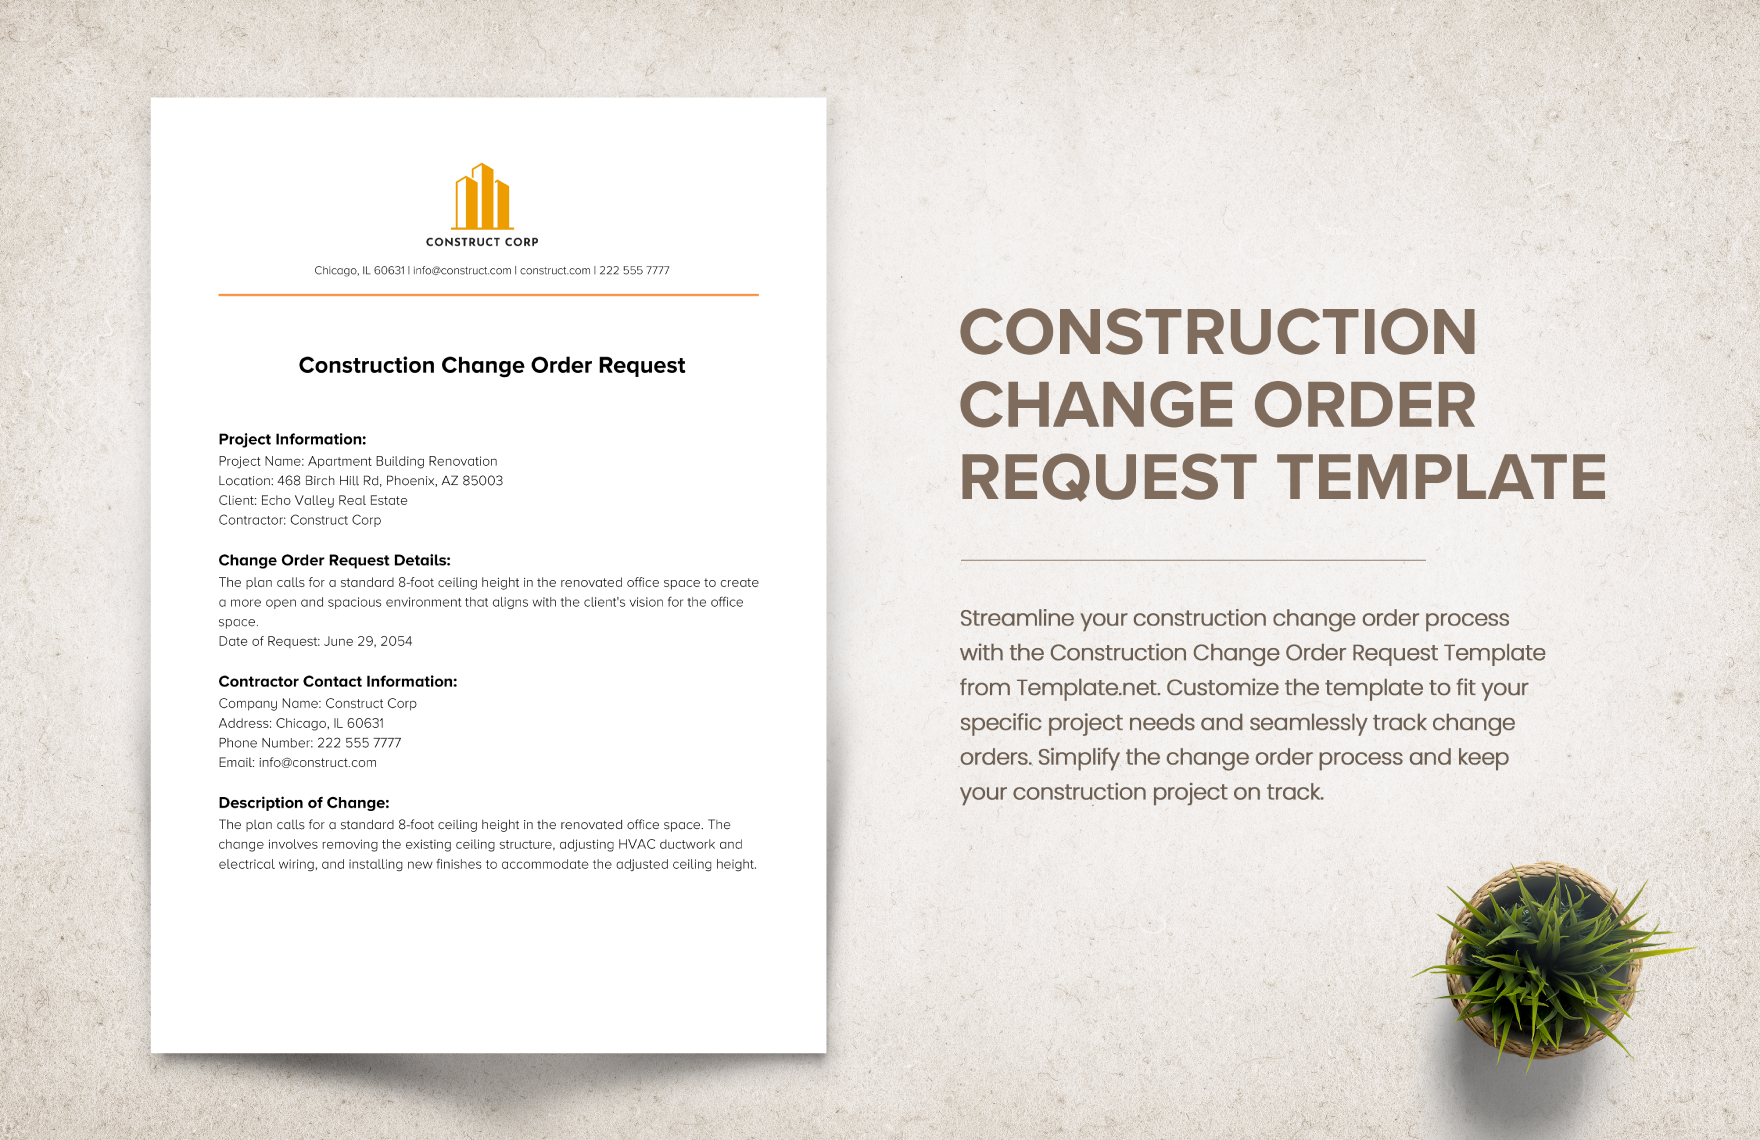 Construction Change Order Request Template